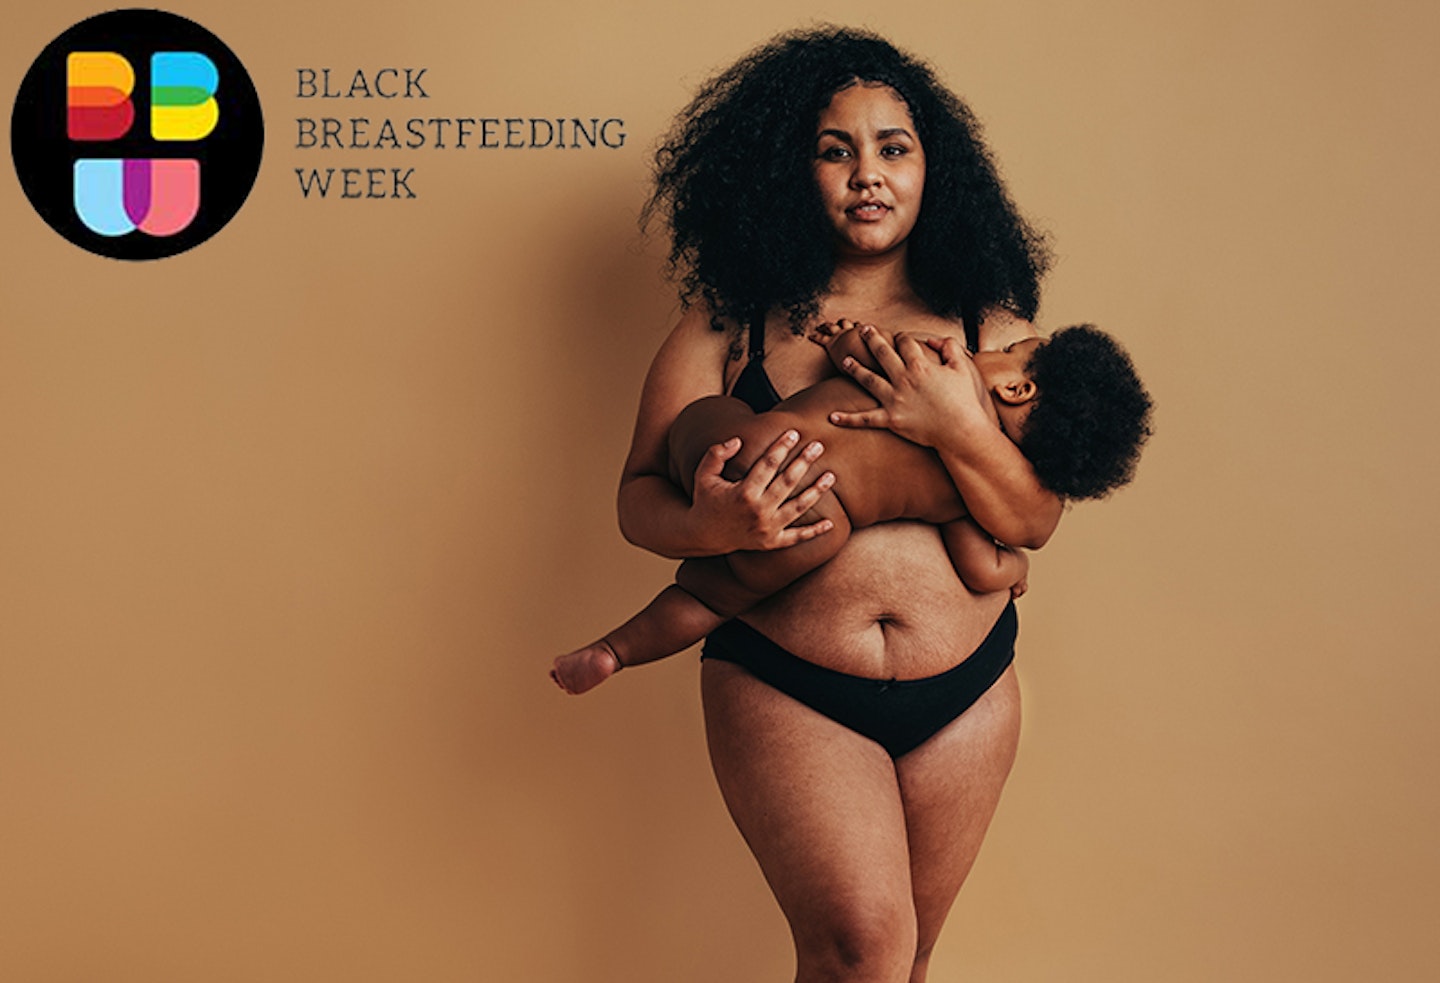 Breastfeed Croydon on X: We celebrate #BBW21 and our community in